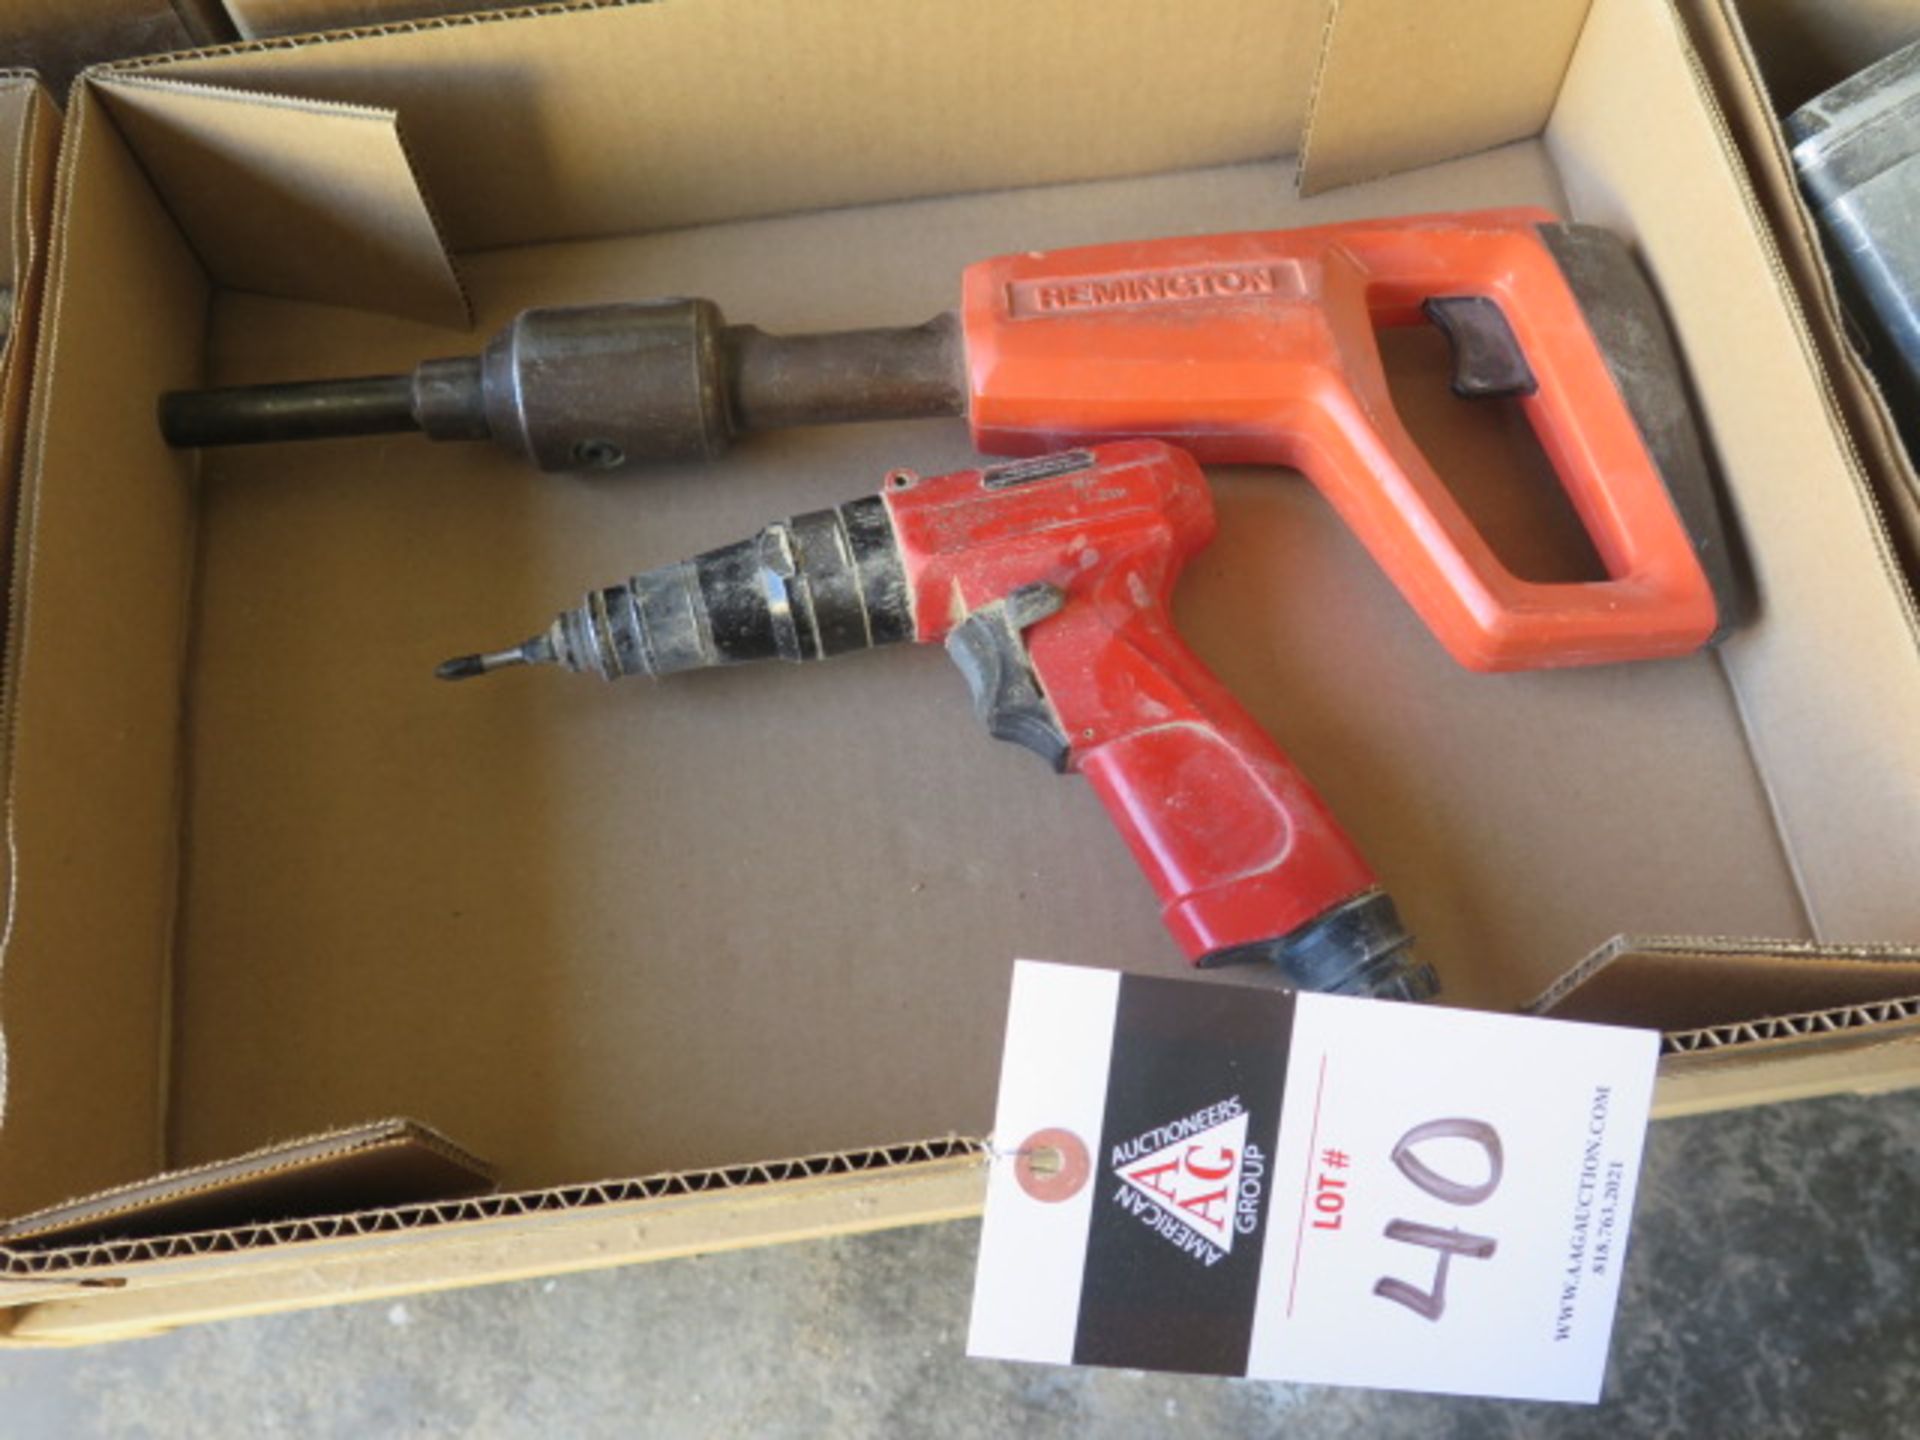 Remington Powder Shot Tool and Chicago Pneumatic Nut Driver (SOLD AS-IS - NO WARRANTY)